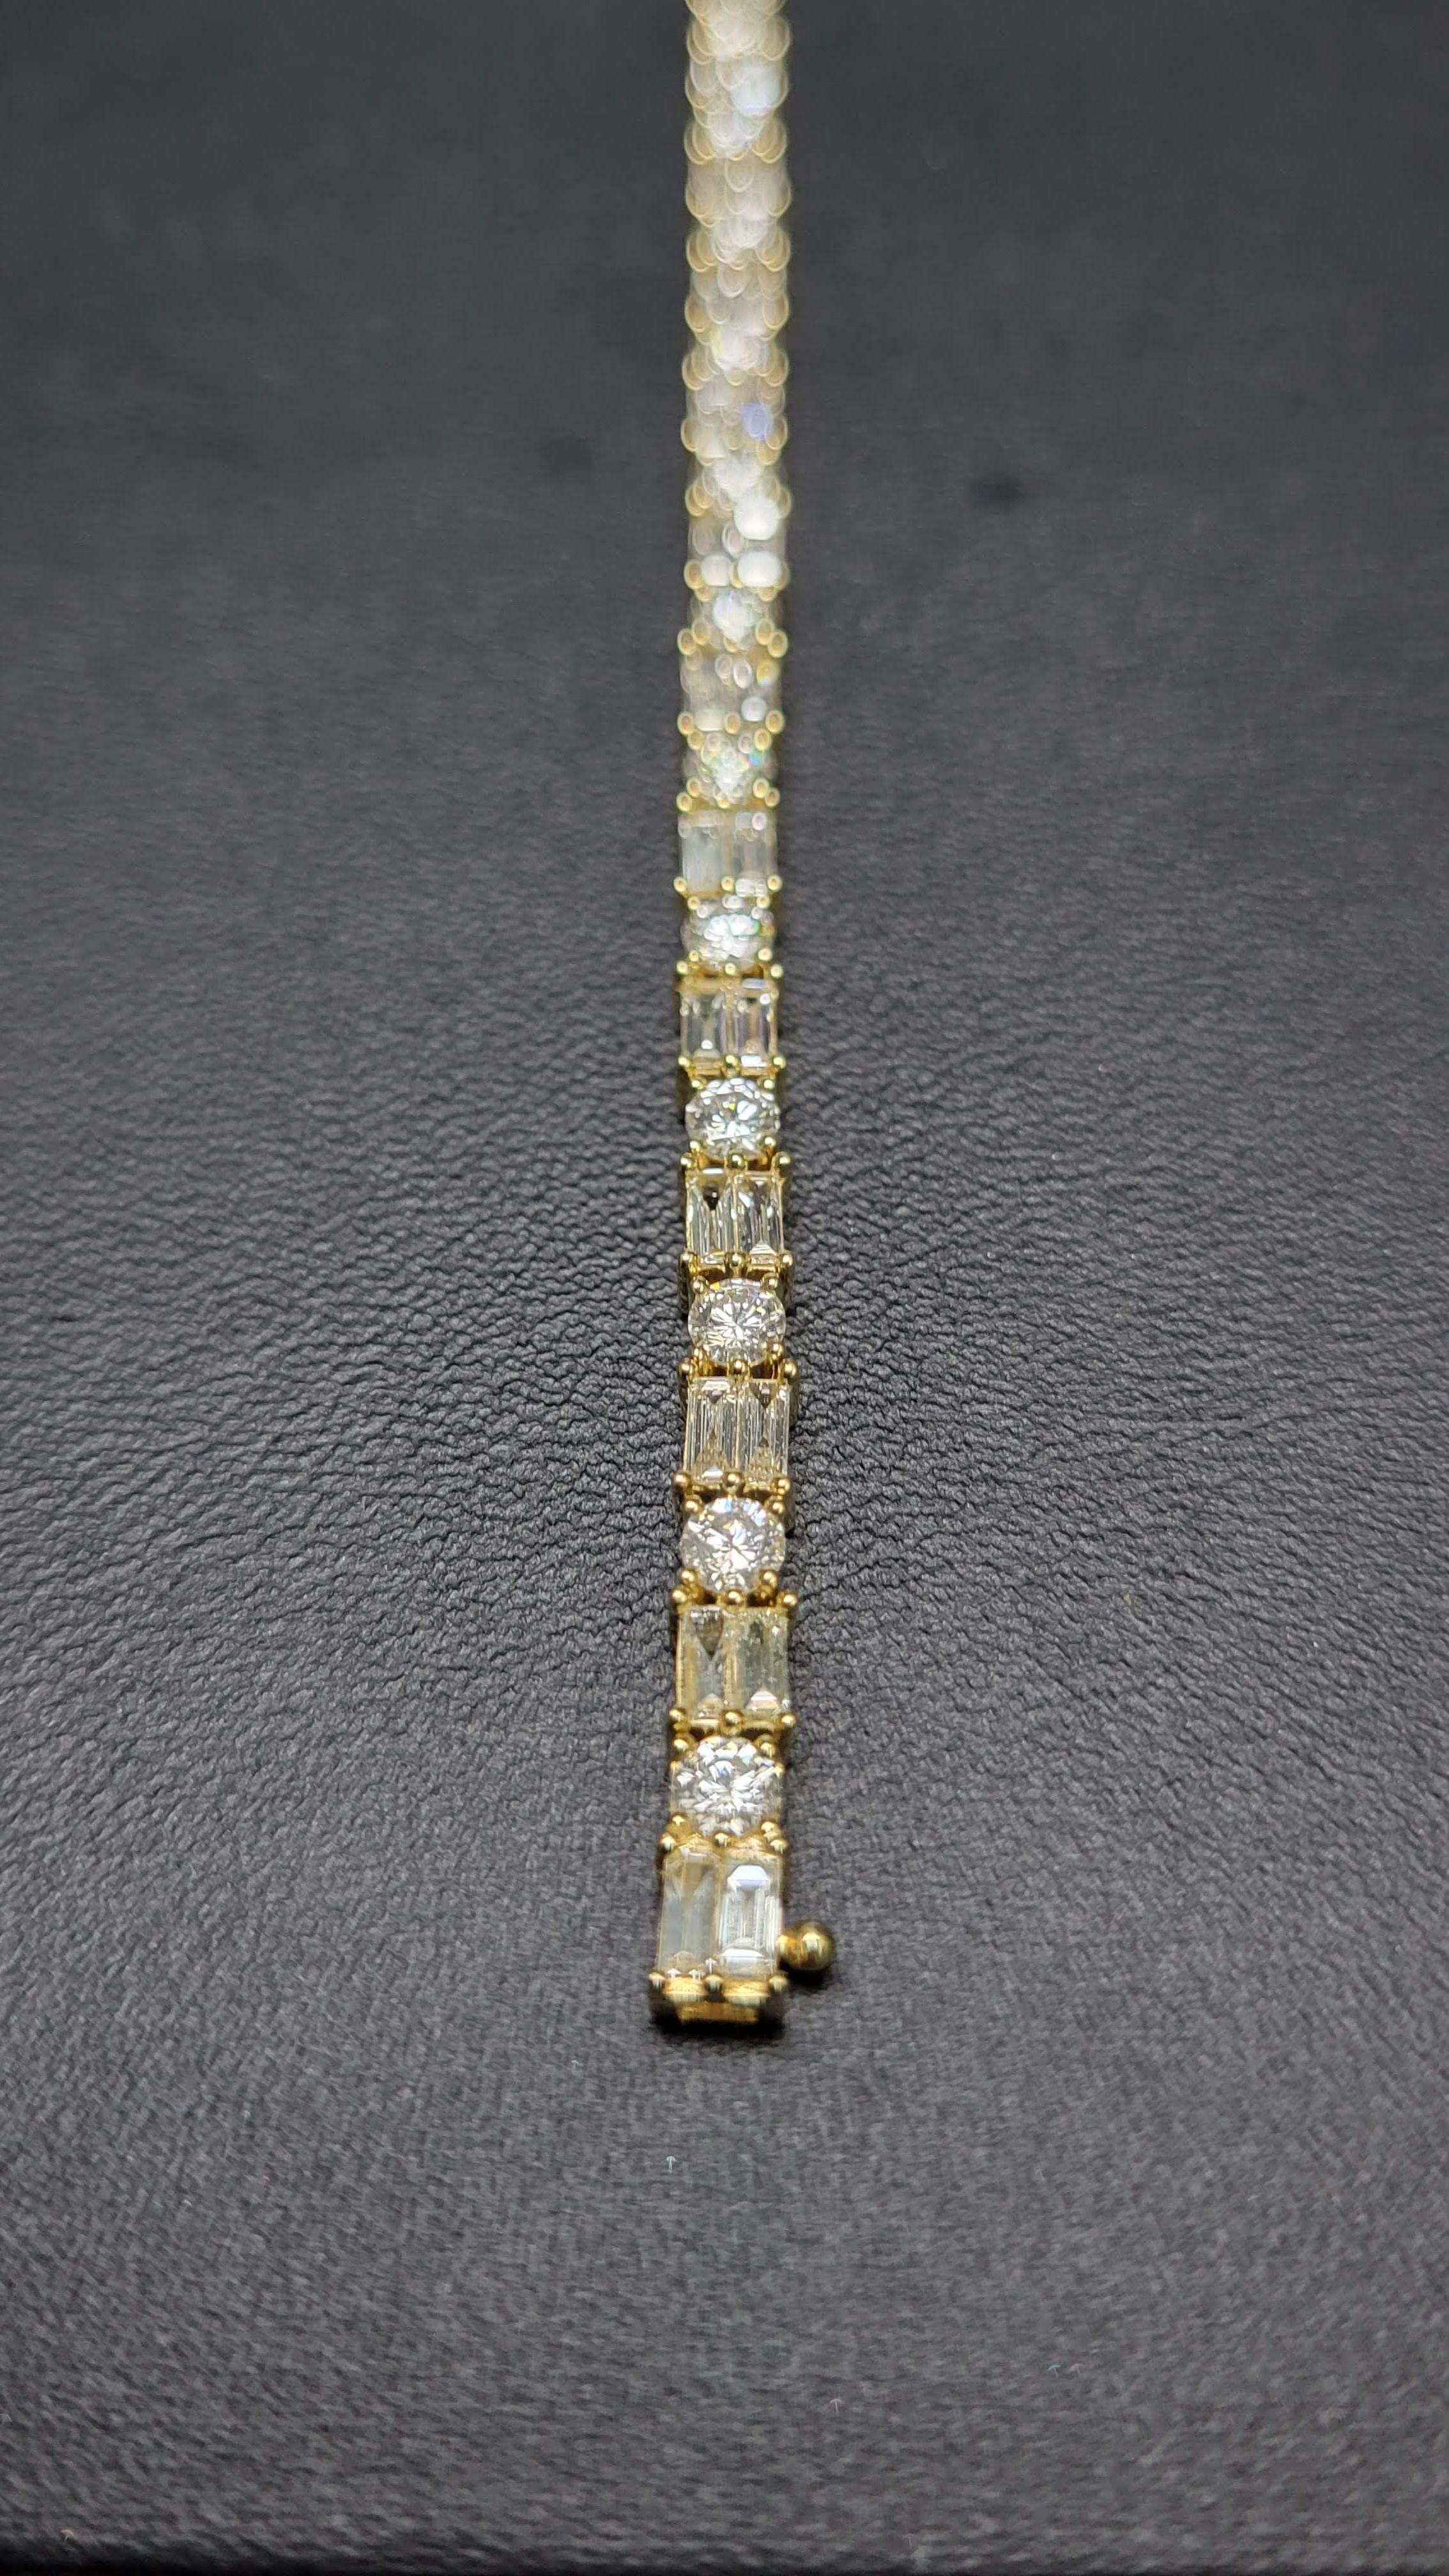 Simple yet brilliant, this classic diamond bracelet features round and baguette diamonds framed in 18K yellow gold.

Lot #: 04617

18K/Y Gold: 9.61g

White Diamond Weight: 
4.28cts
